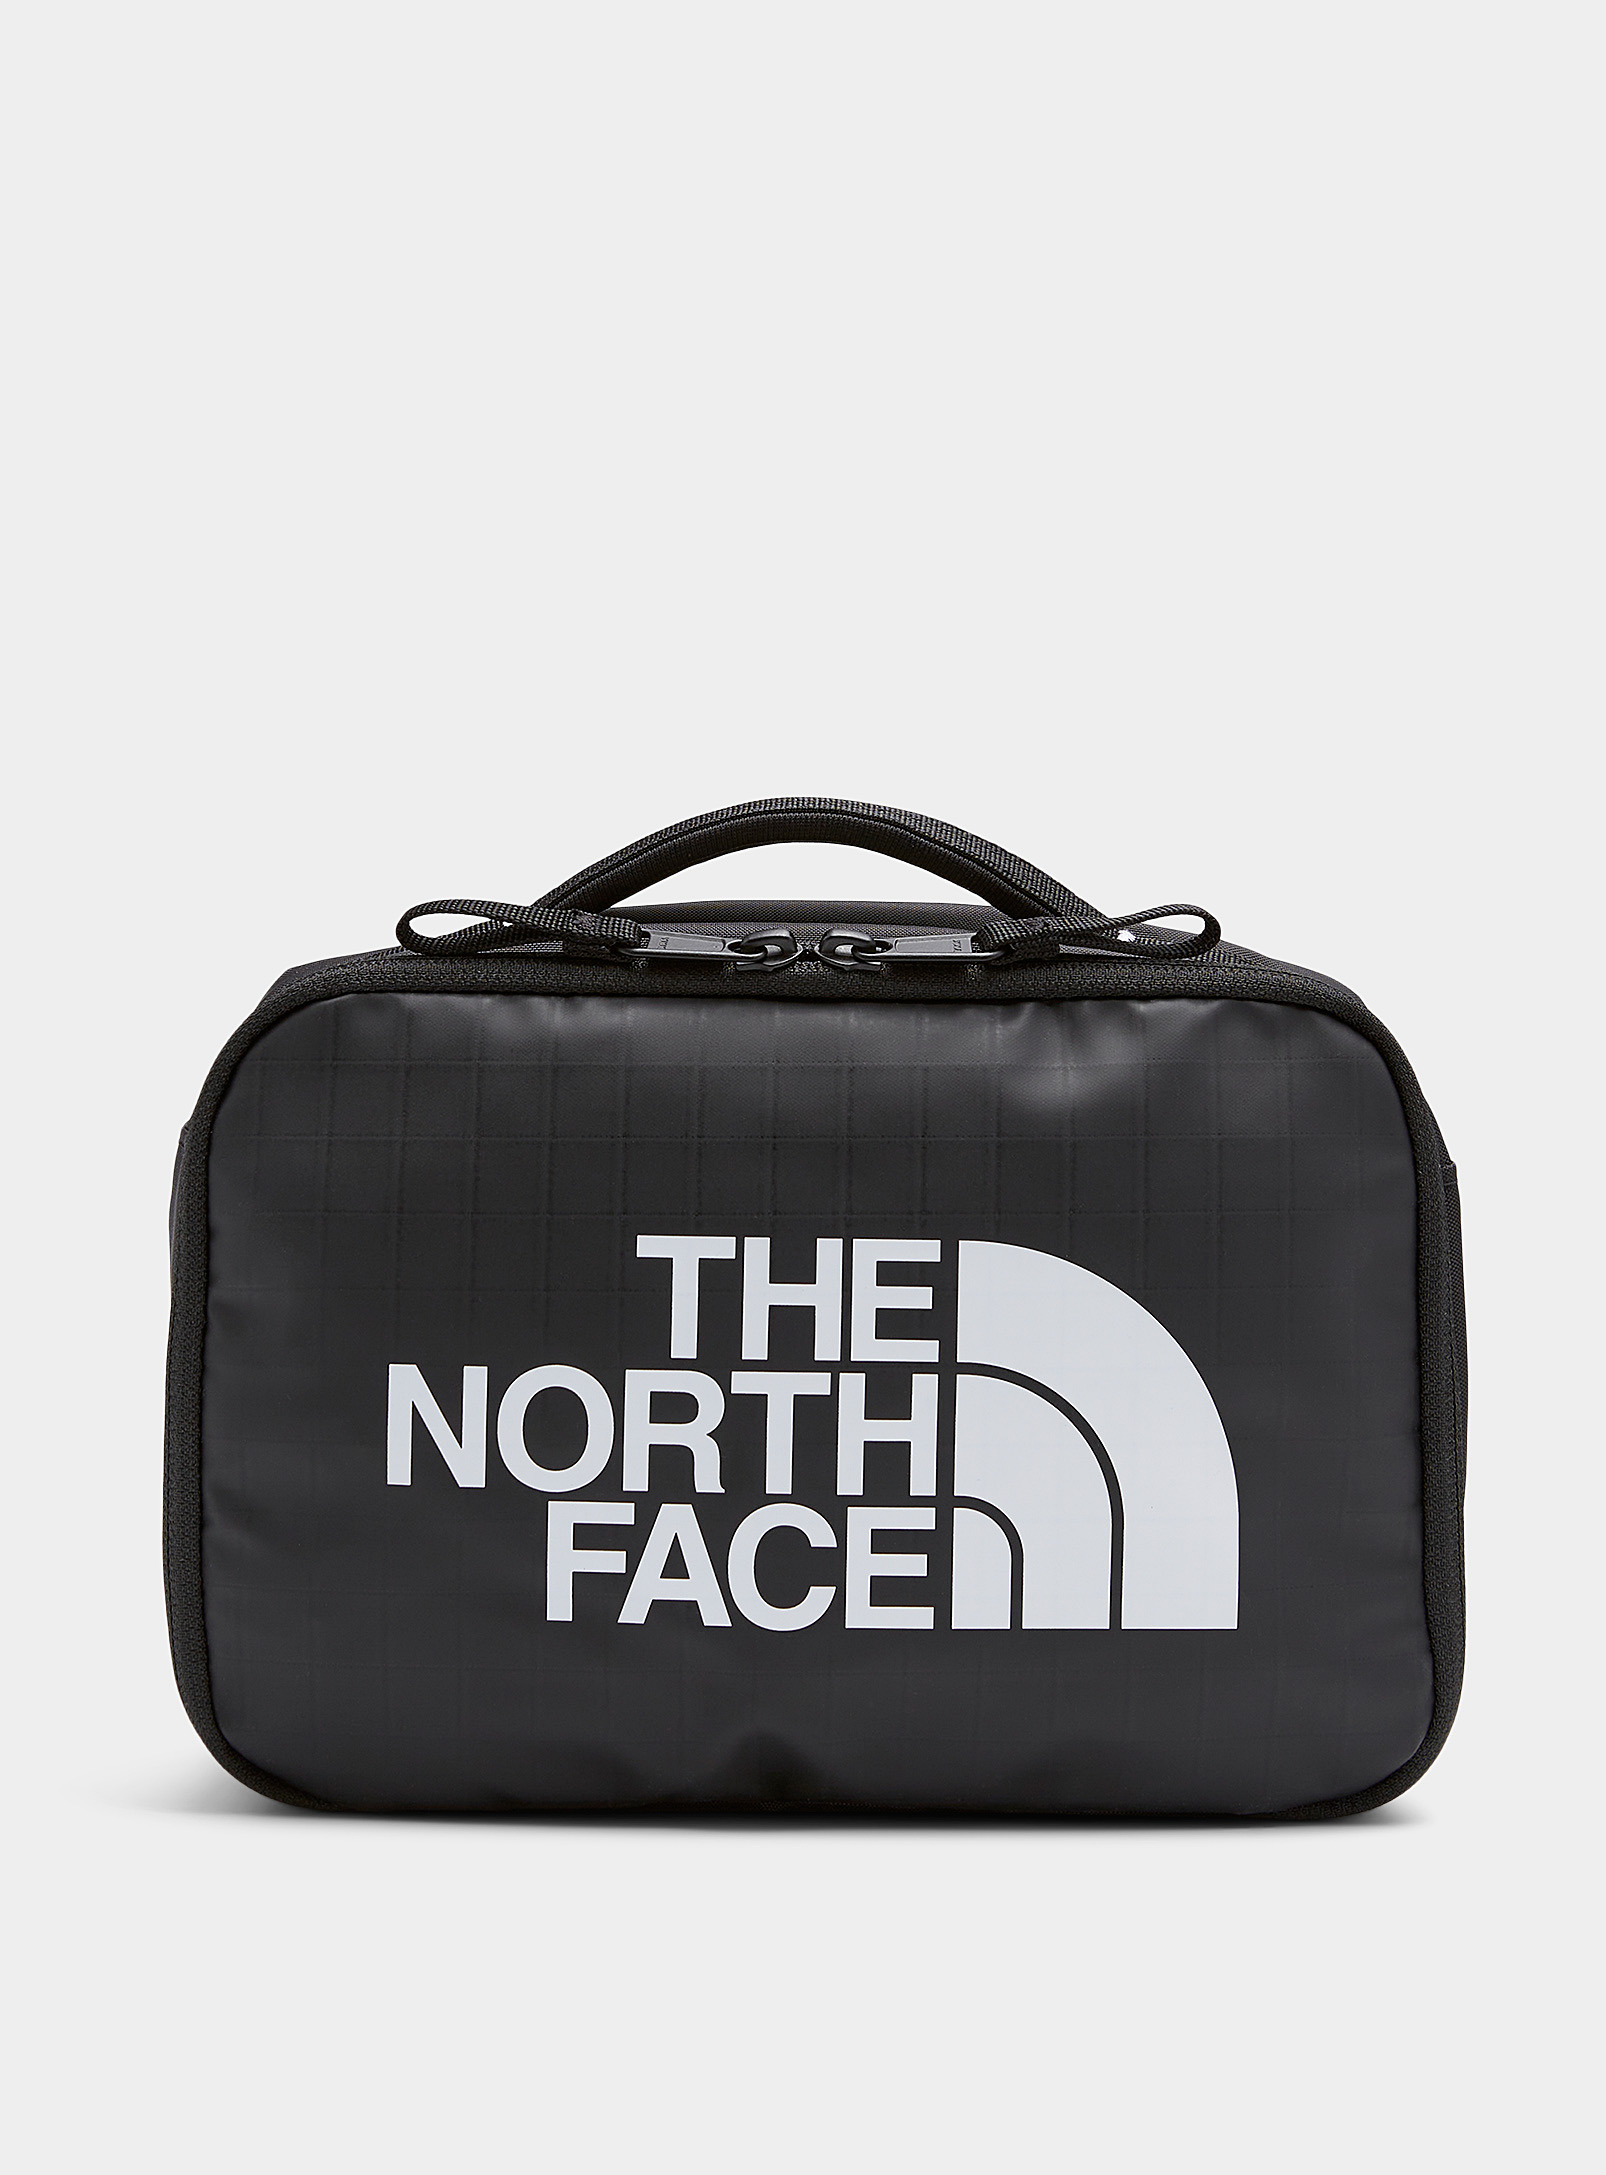 The North Face - Men's Base Camp travel case